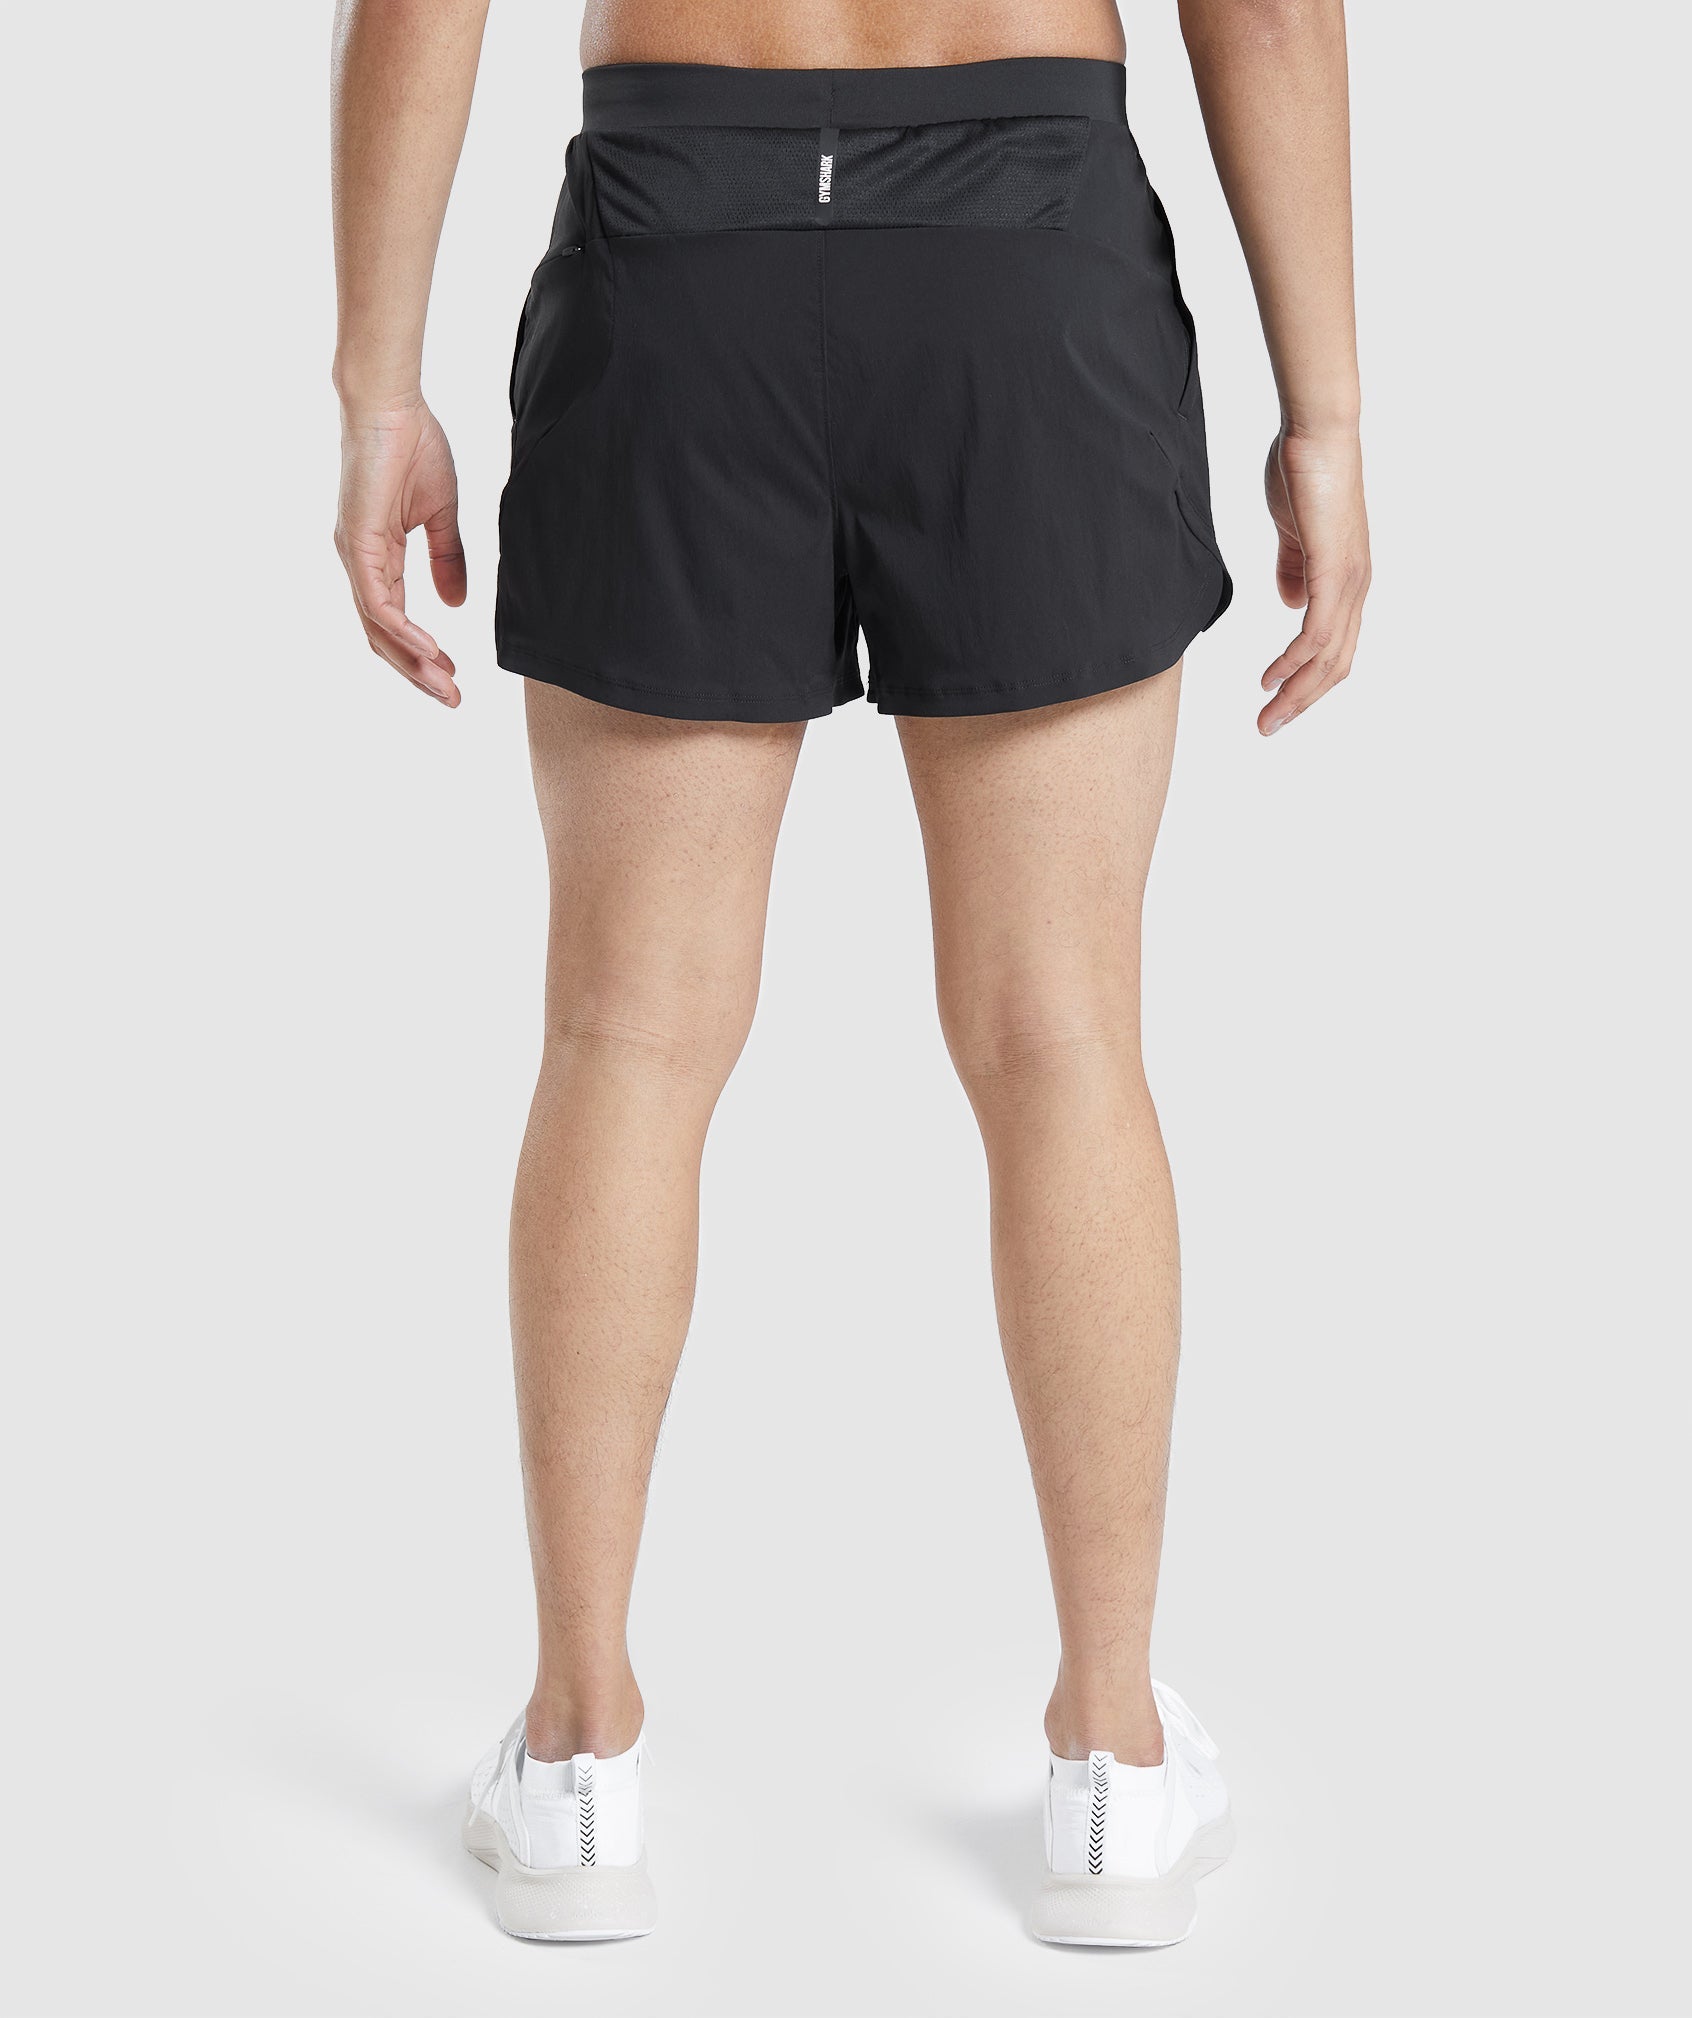 Speed Evolve 3" 2 In 1 Shorts in Black - view 3